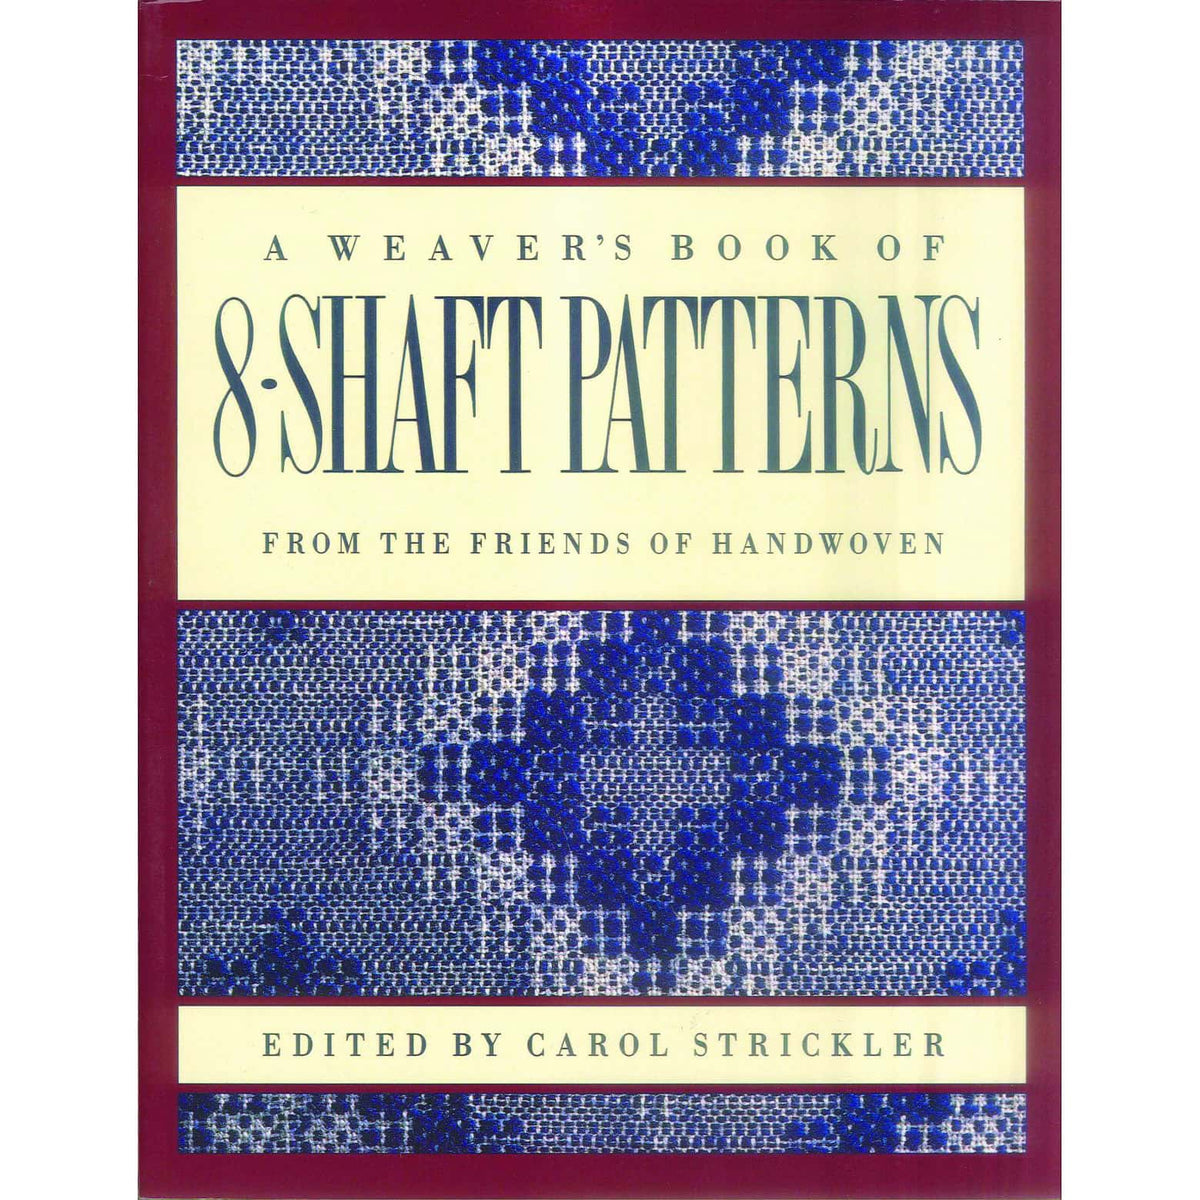 The Weavers Book of 8 Shaft Patterns - Thread Collective Australia